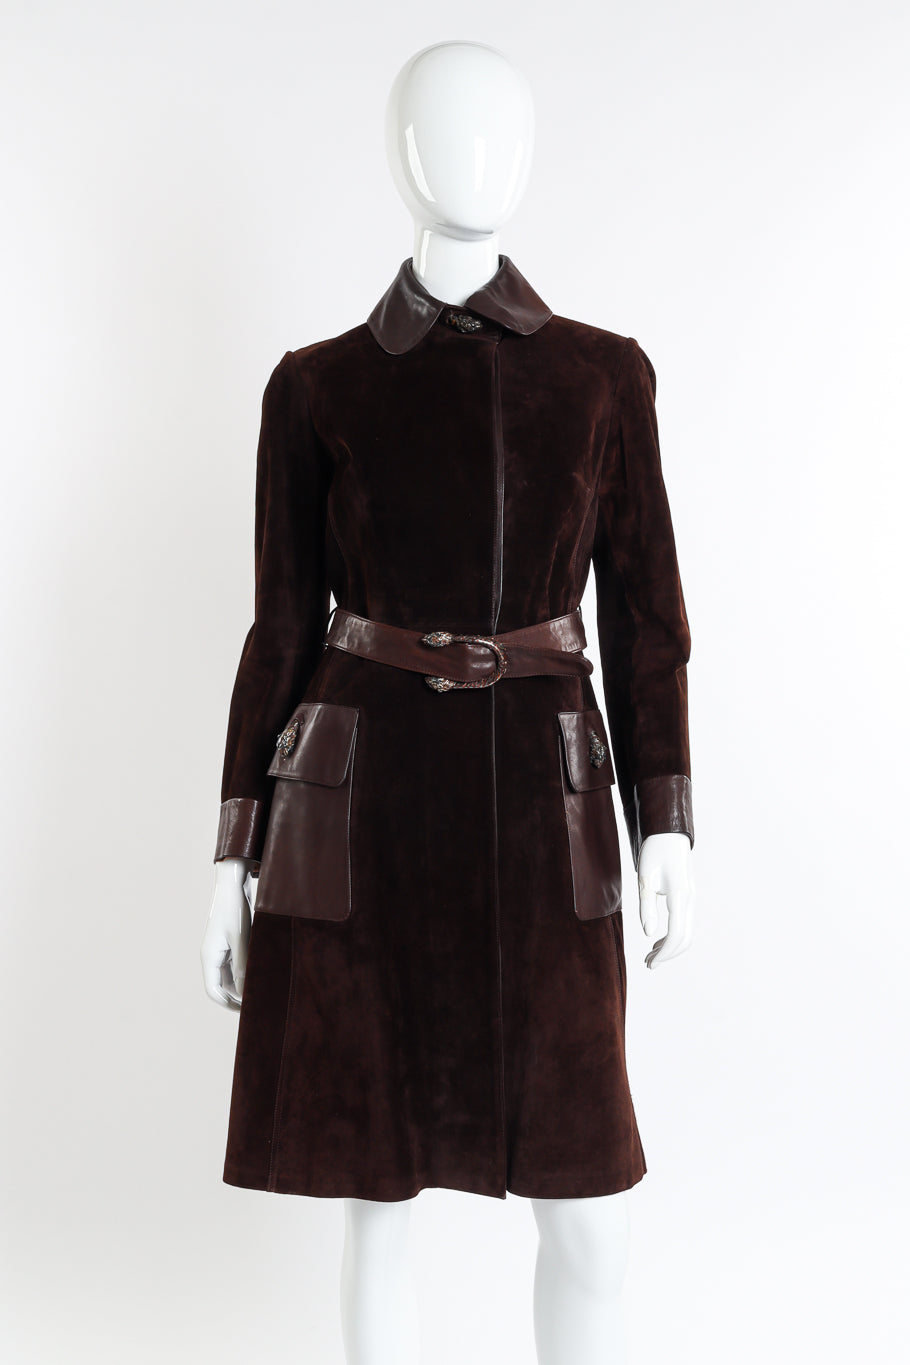 Vintage Gucci Suede and Leather Coat front on mannequin @recessla